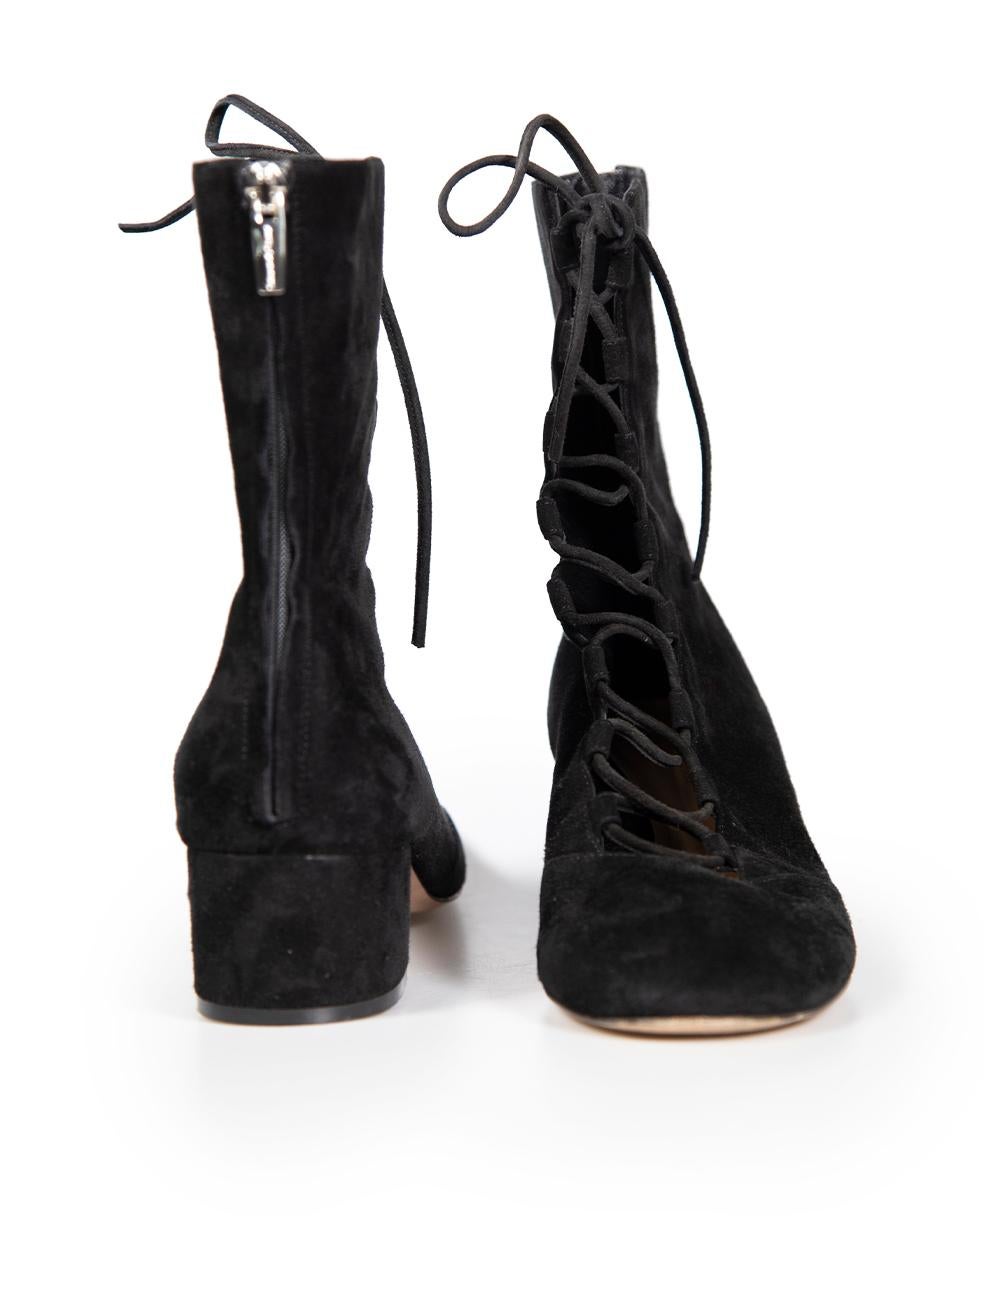 Gianvito Rossi Black Suede Lace Up Boots In Excellent Condition For Sale In London, GB